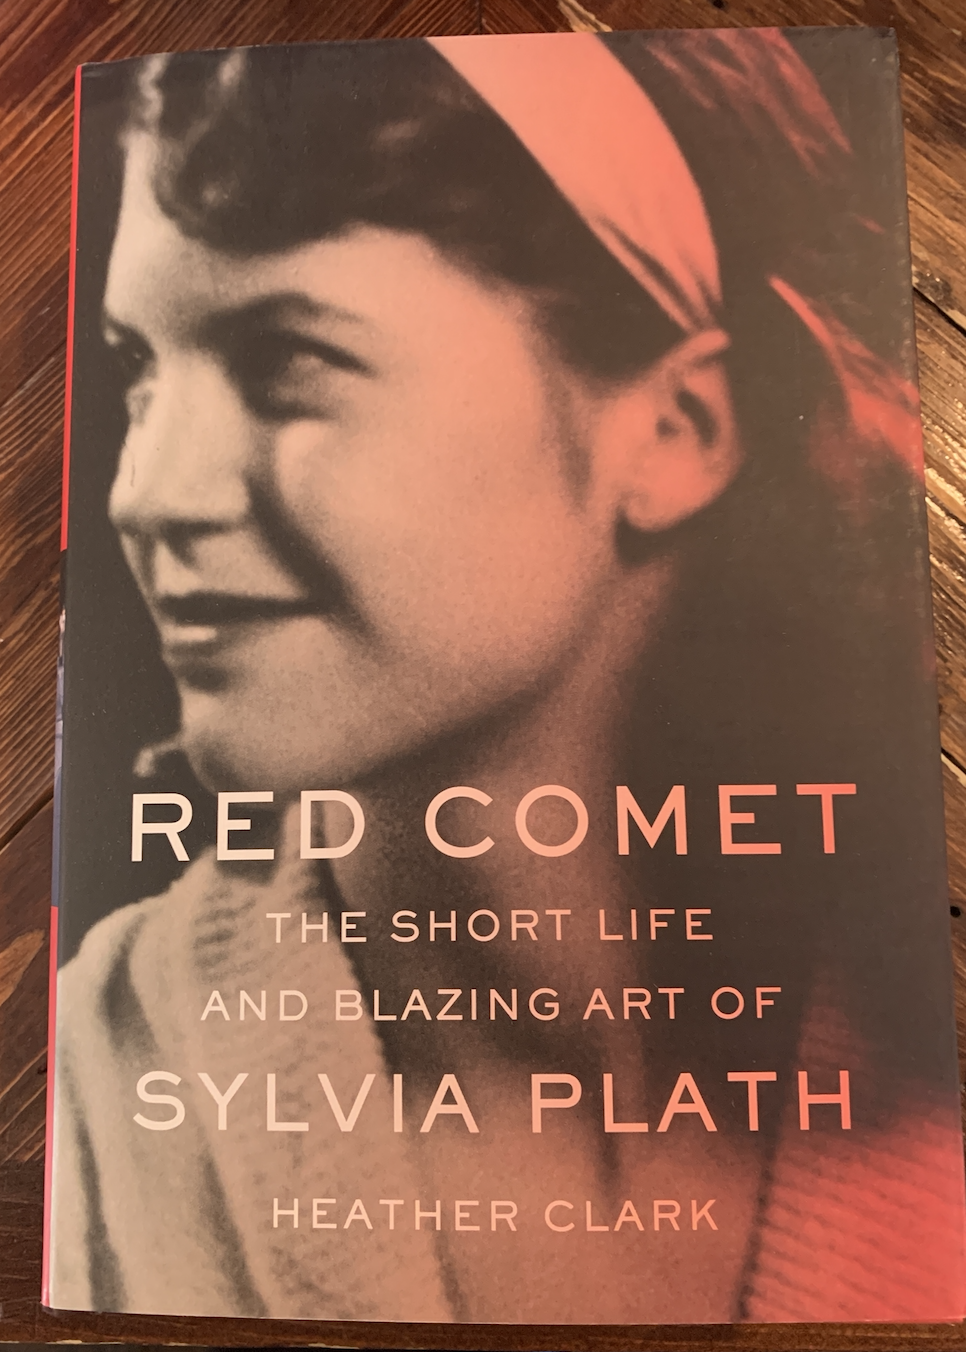 red comet sylvia plath review